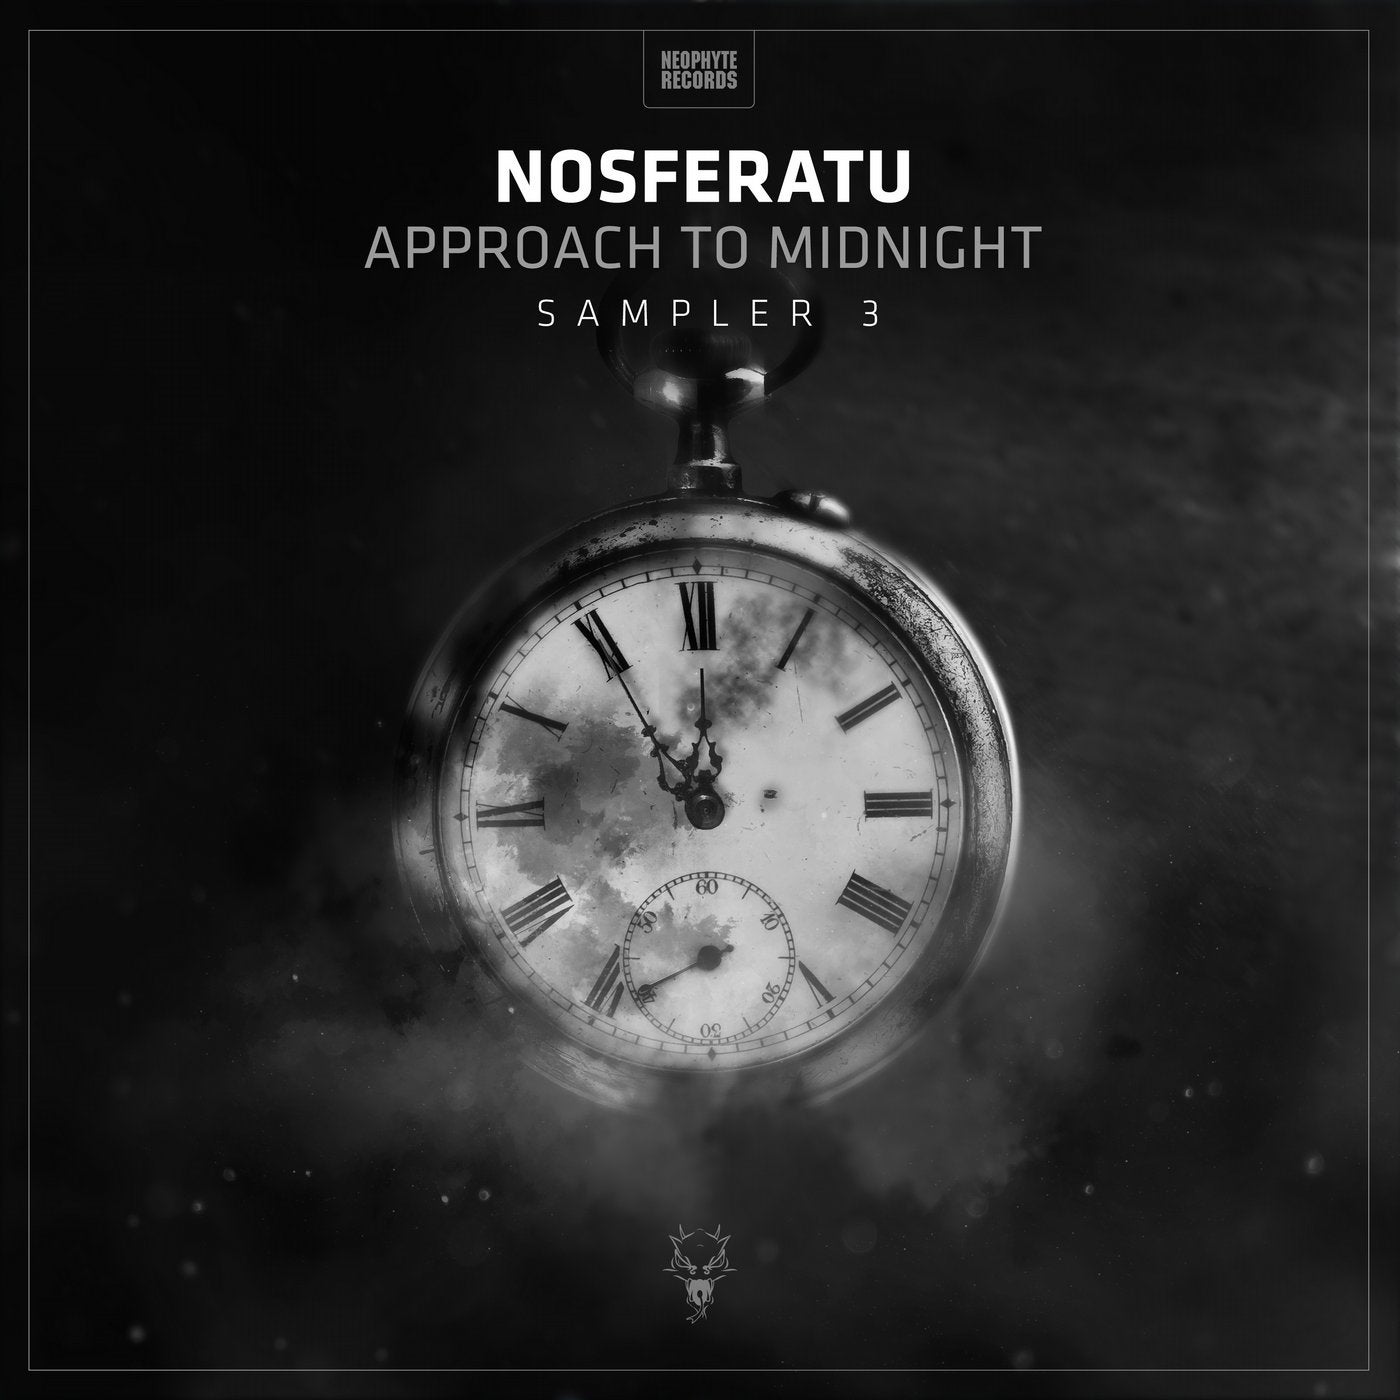 Approach To Midnight Sampler 3 - Extended Mixes